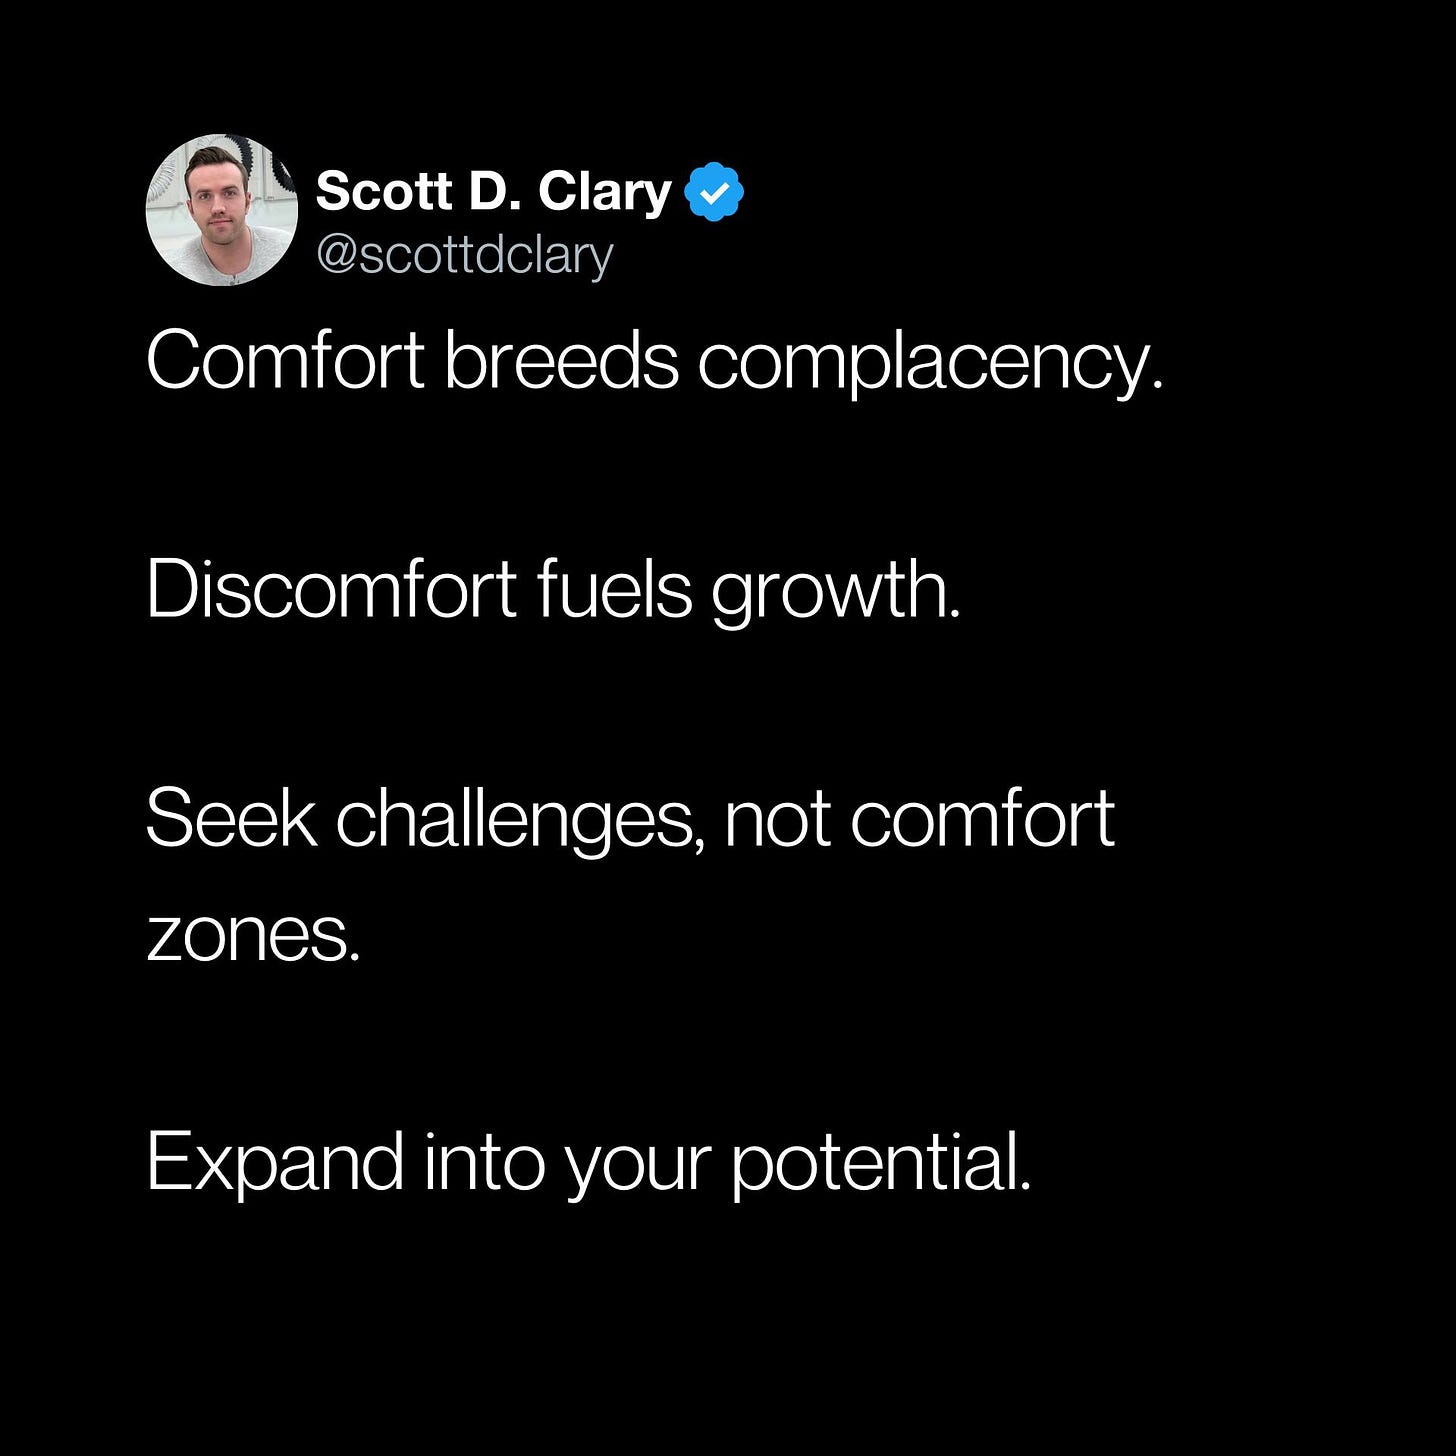 May be an image of 1 person and text that says 'Scott D. Clary @scottdclary Comfort breeds complacency. Discomfort fuels growth. Seek challenges, not comfort zones. Expand into your potential.'